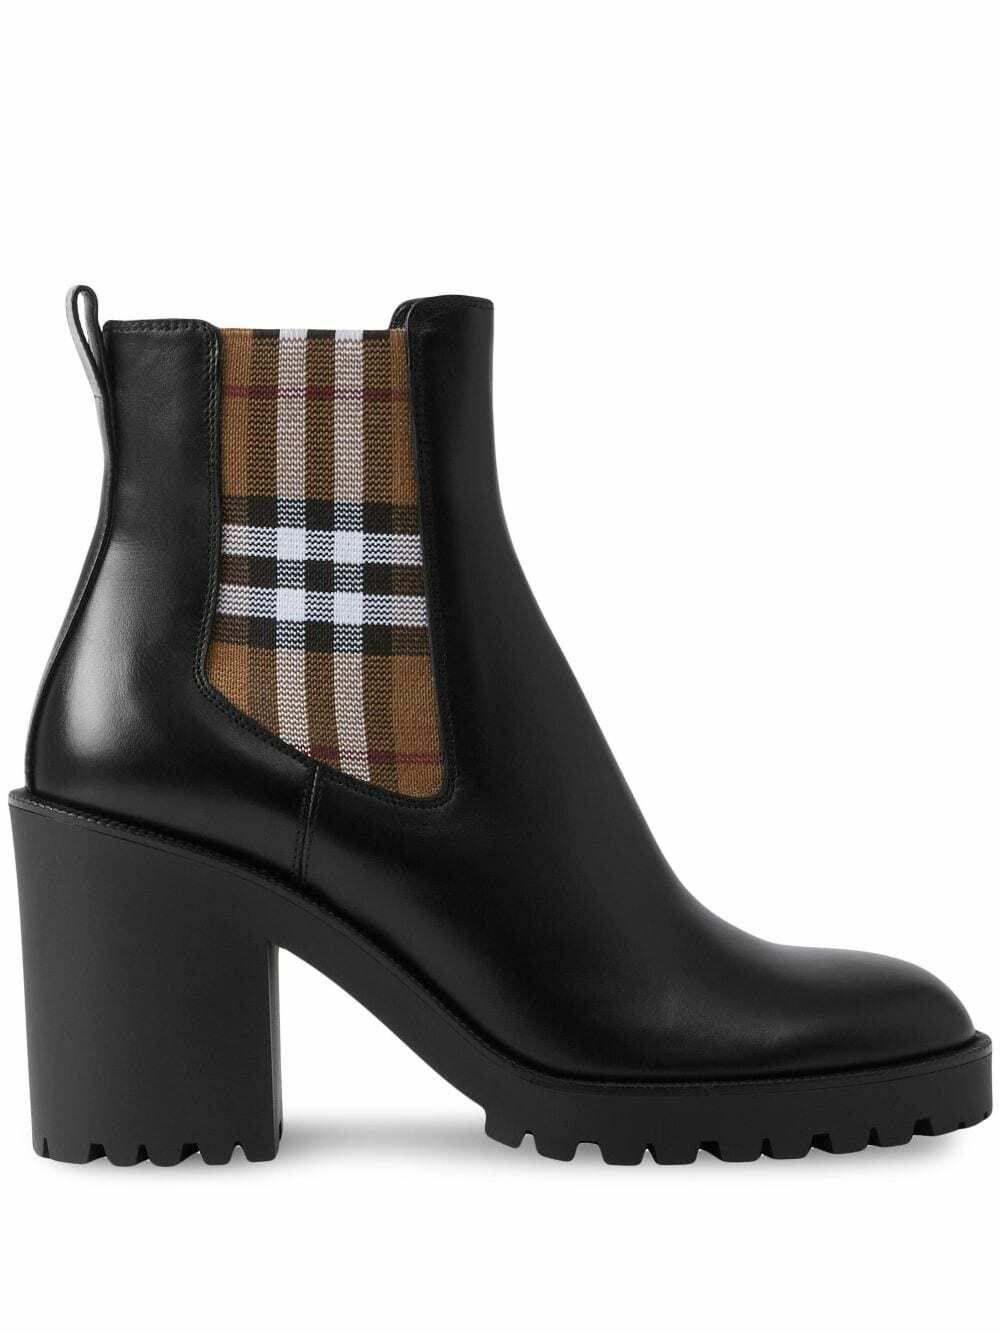 BURBERRY - Check Motif Leather Ankle Boots Burberry